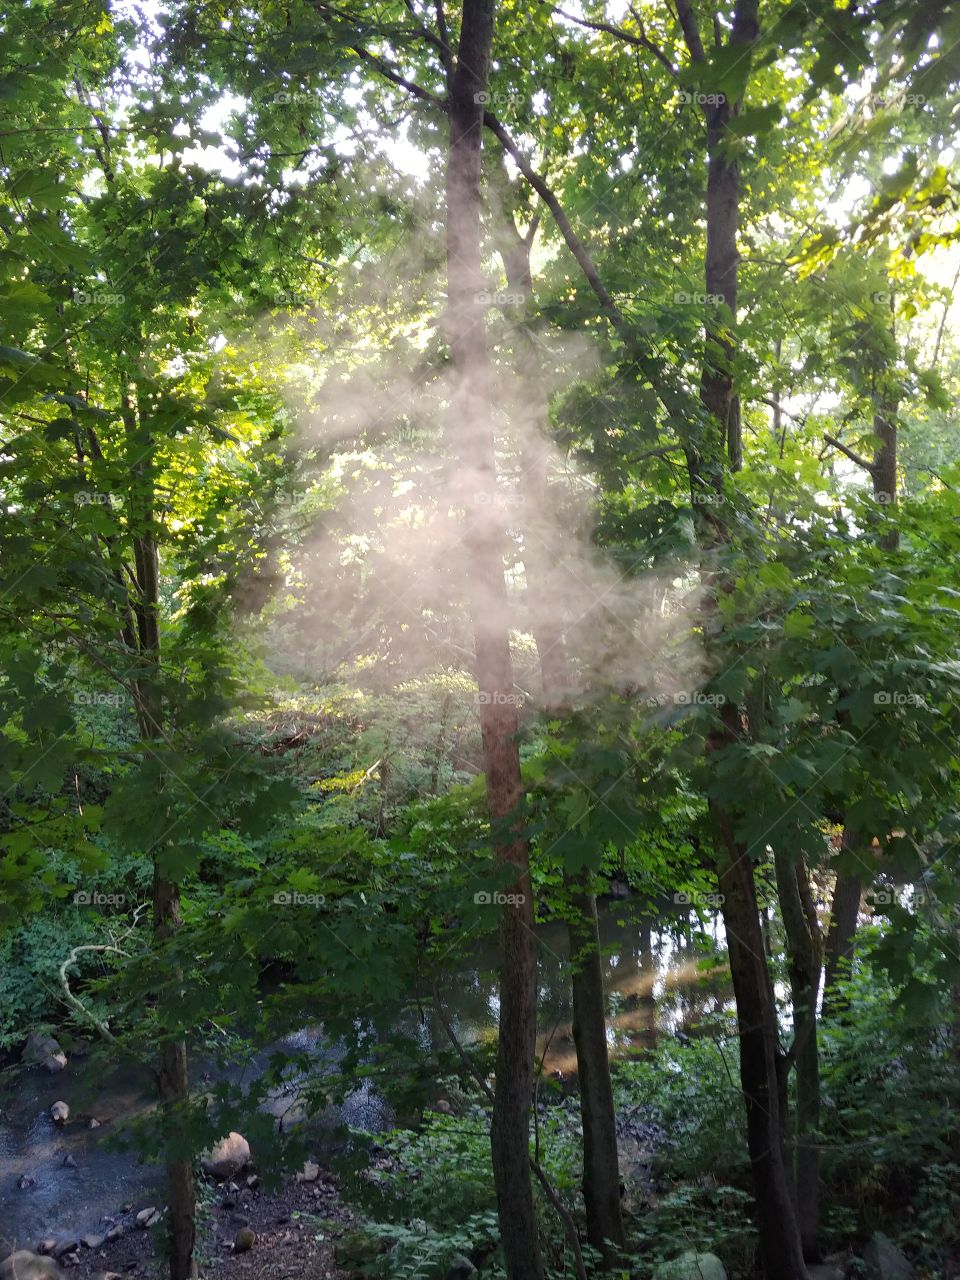 just a cloud of smoke from this mornings wake and bake. gotta love smokin by the river, where its so peaceful.